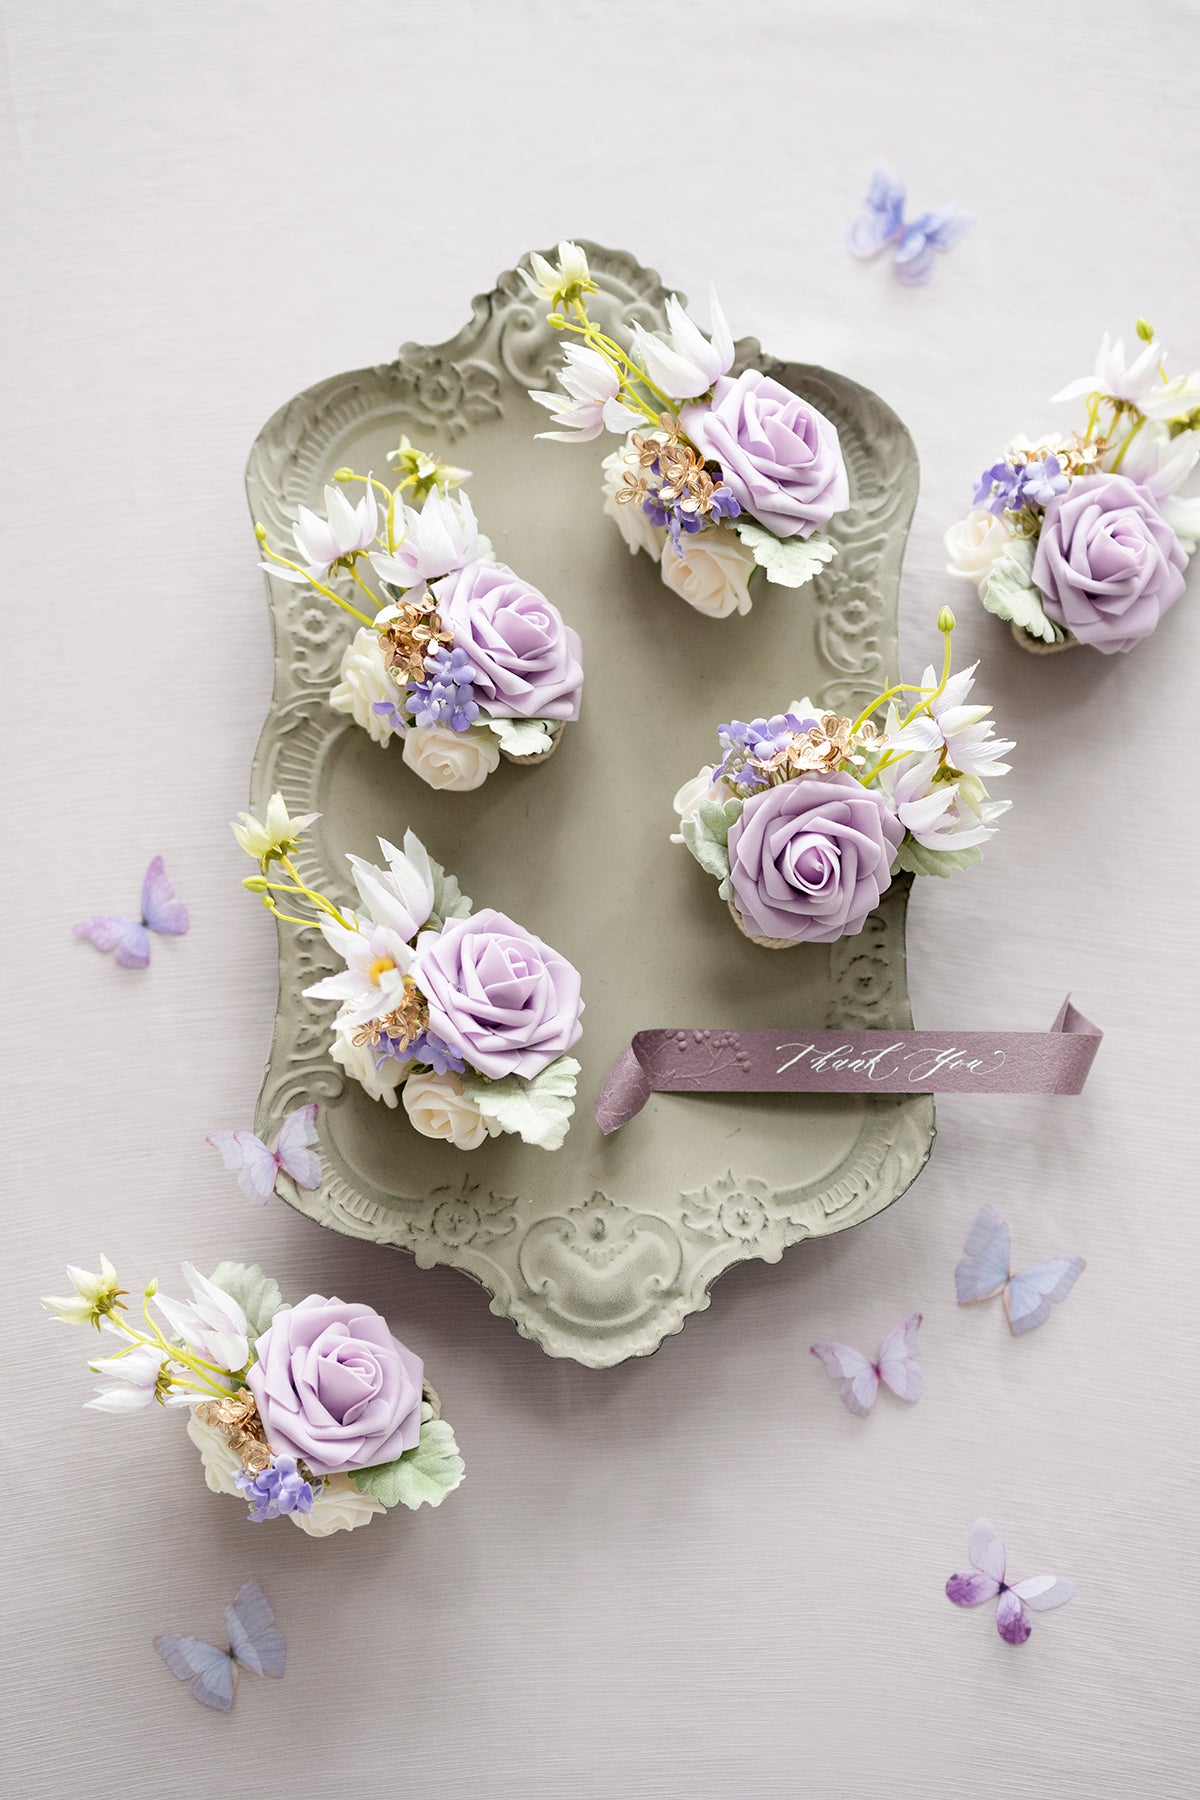 Additional Flower Decorations in Lilac & Gold